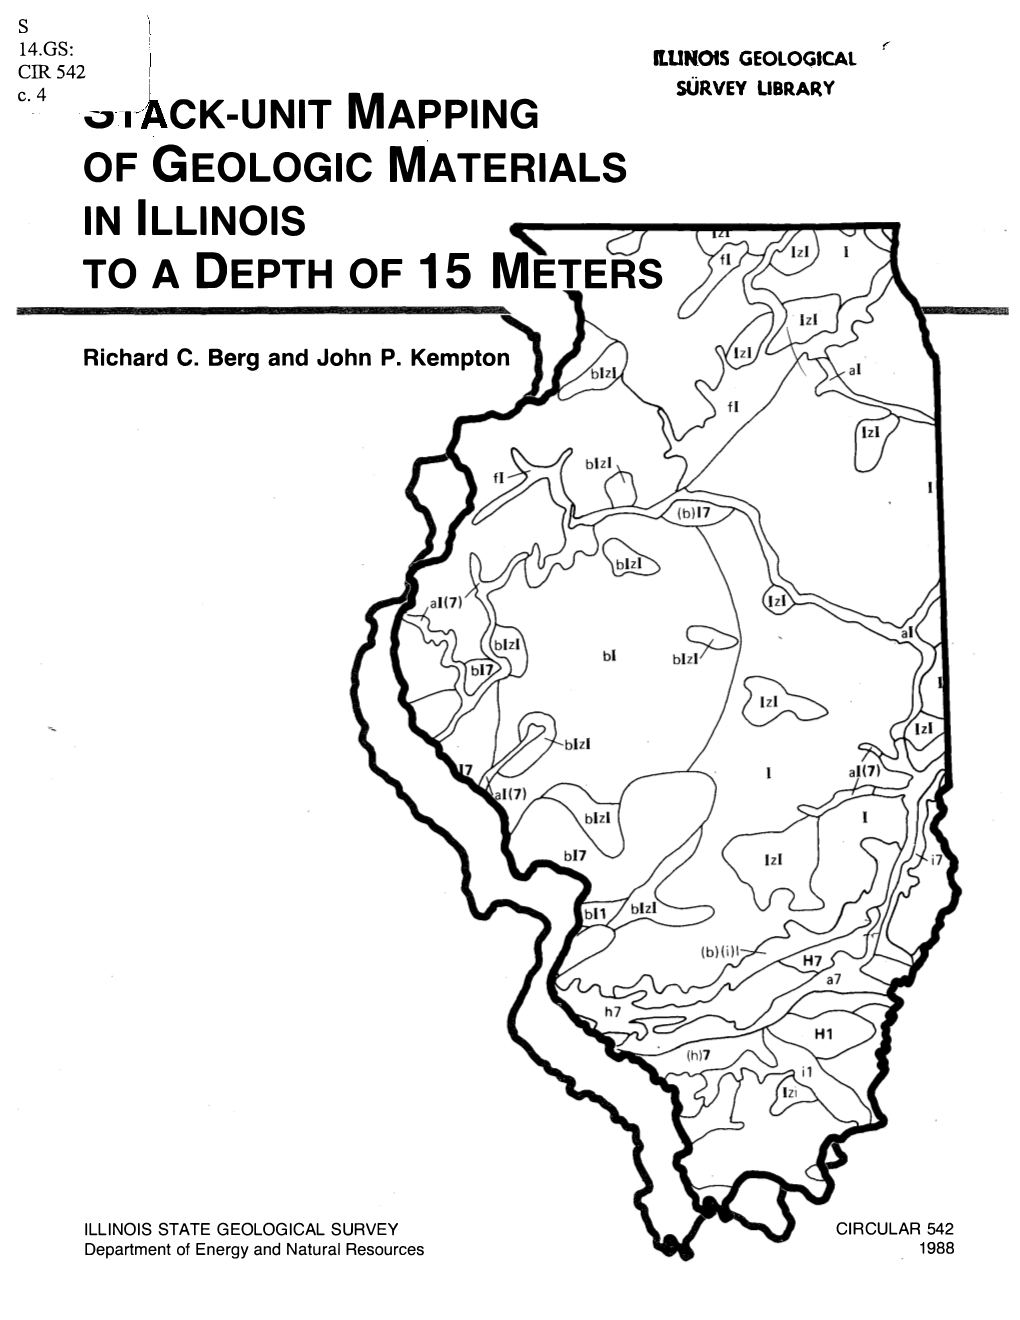 Ck-Unit Mapping of Geologic Materials in Illinois to a Depth of 15 Meters